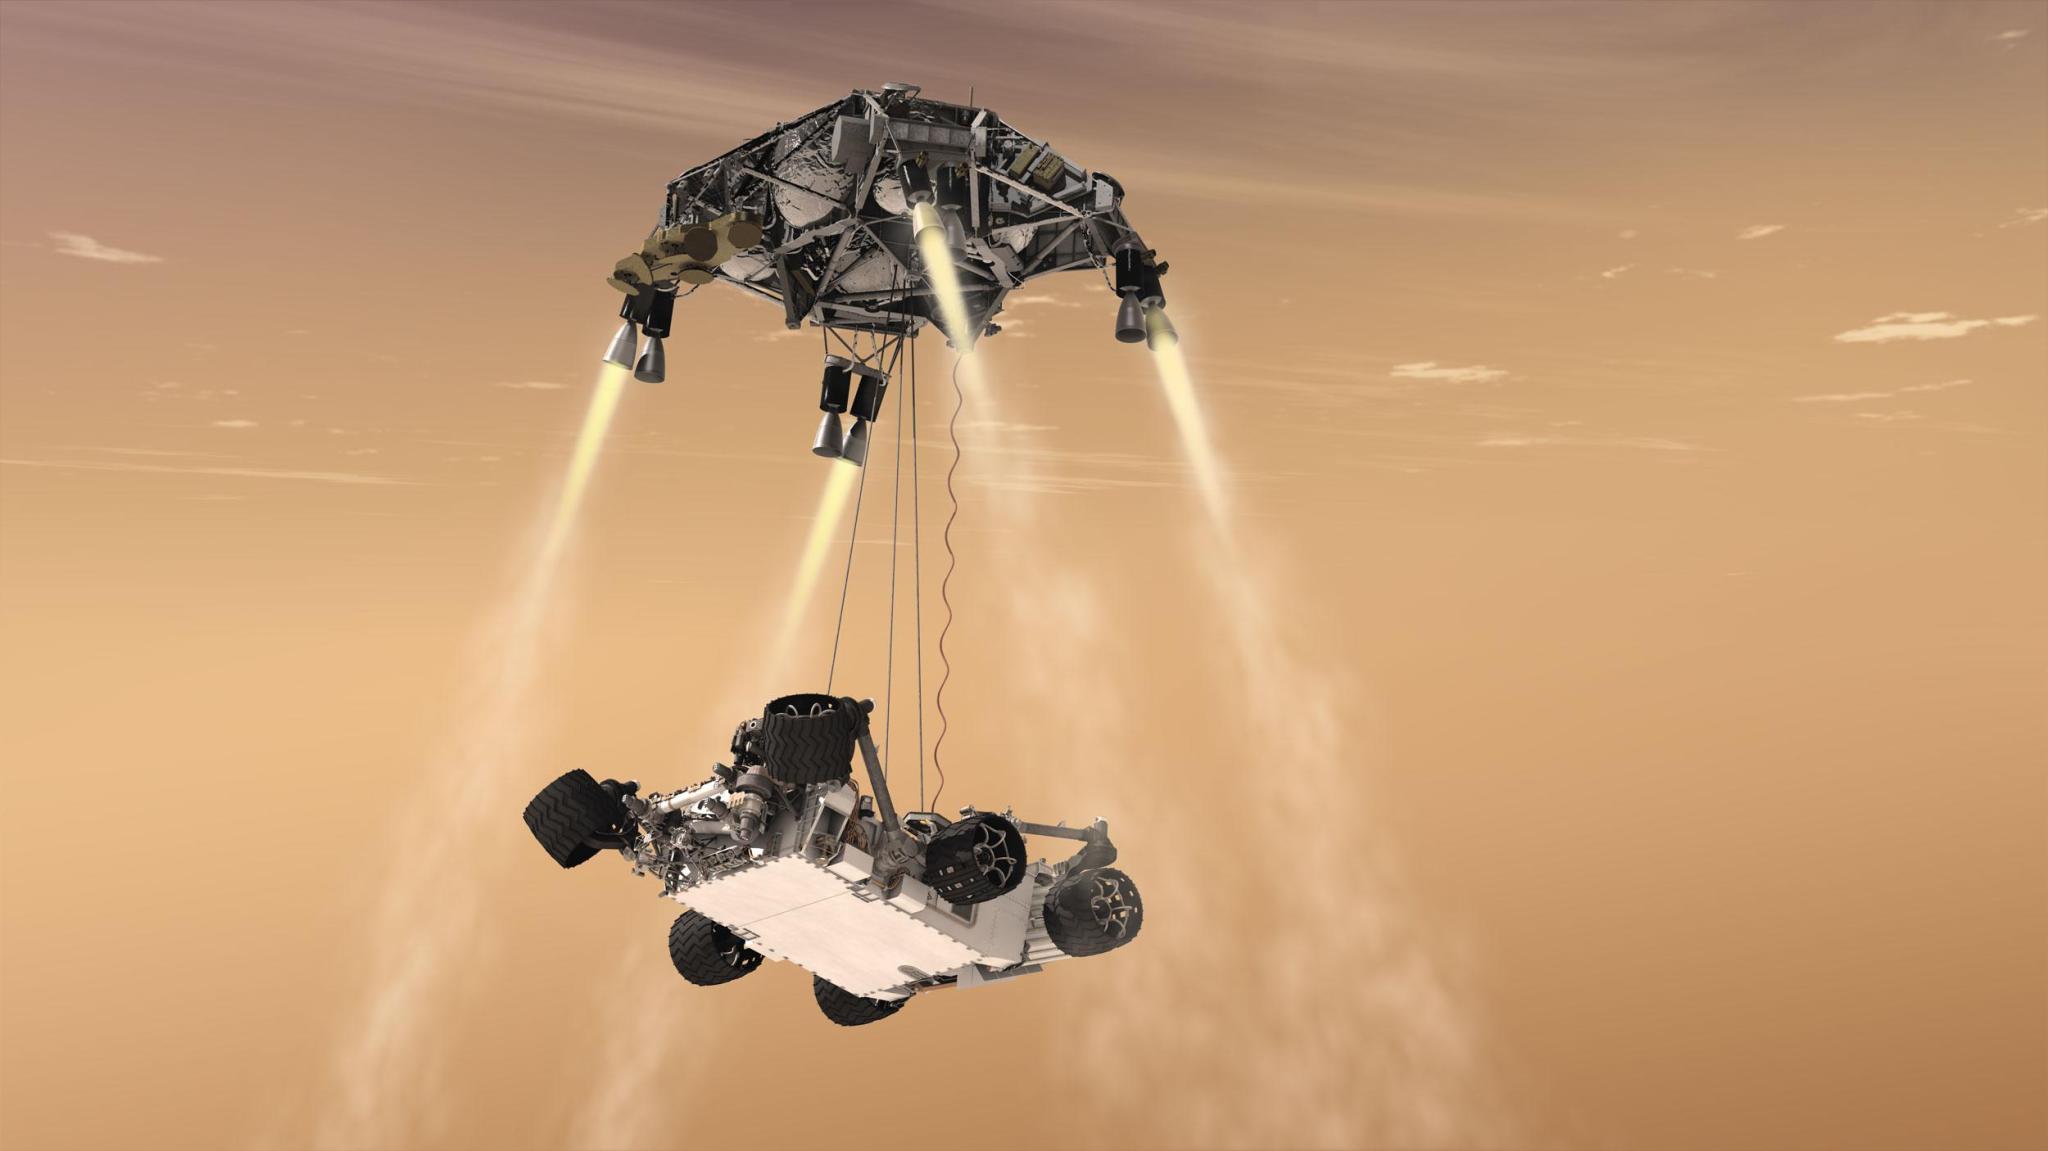 An artist’s concept of the 2012 Mars Curiosity Landing using the skycrane maneuver, with the rover hanging below the hovering spacecraft via three nylon tethers.